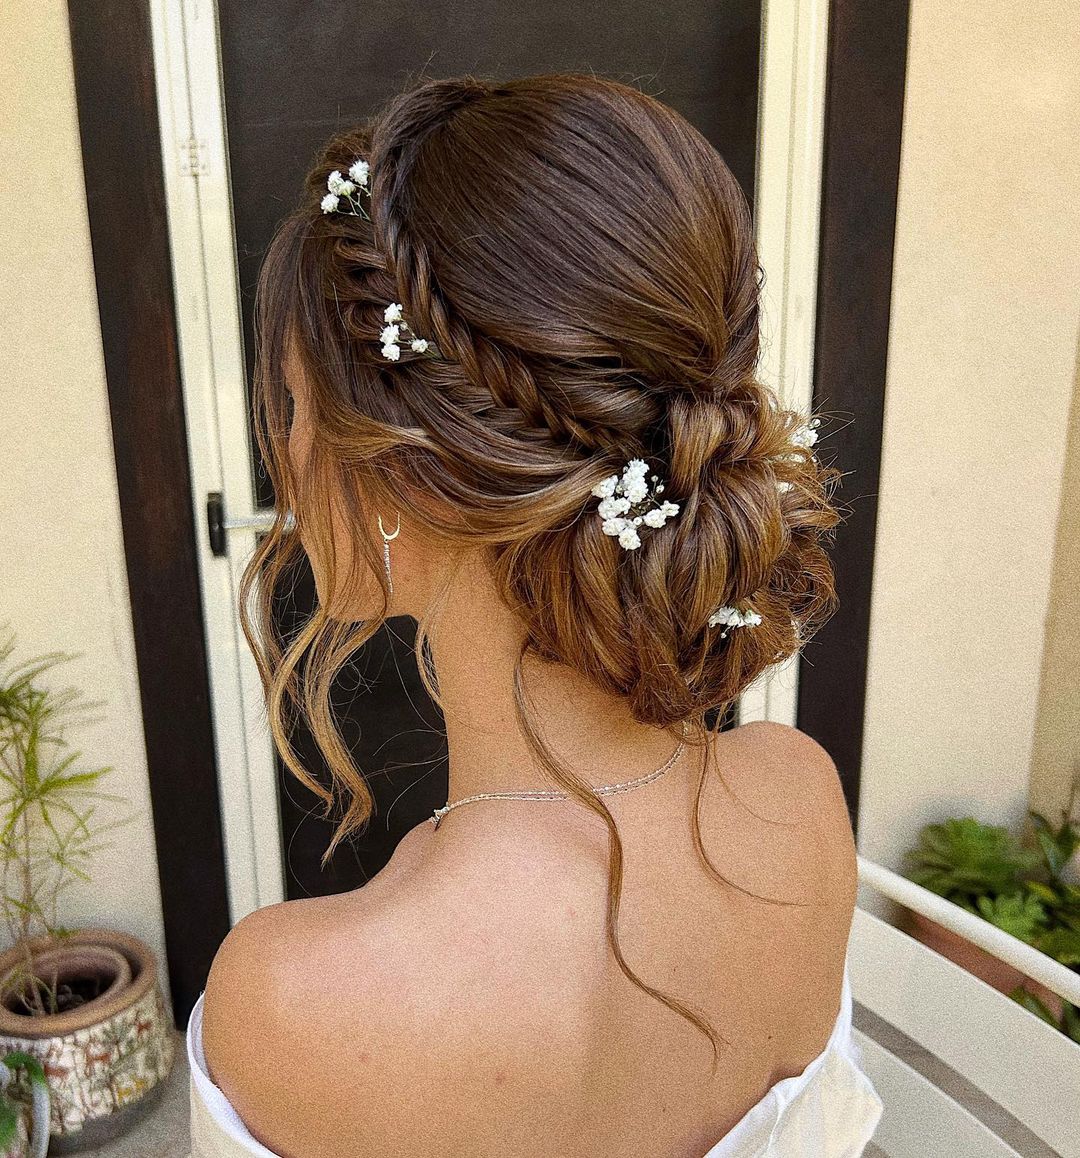 messy braided crown boho updo hairstyle with flowers via zhanna_syniavsk